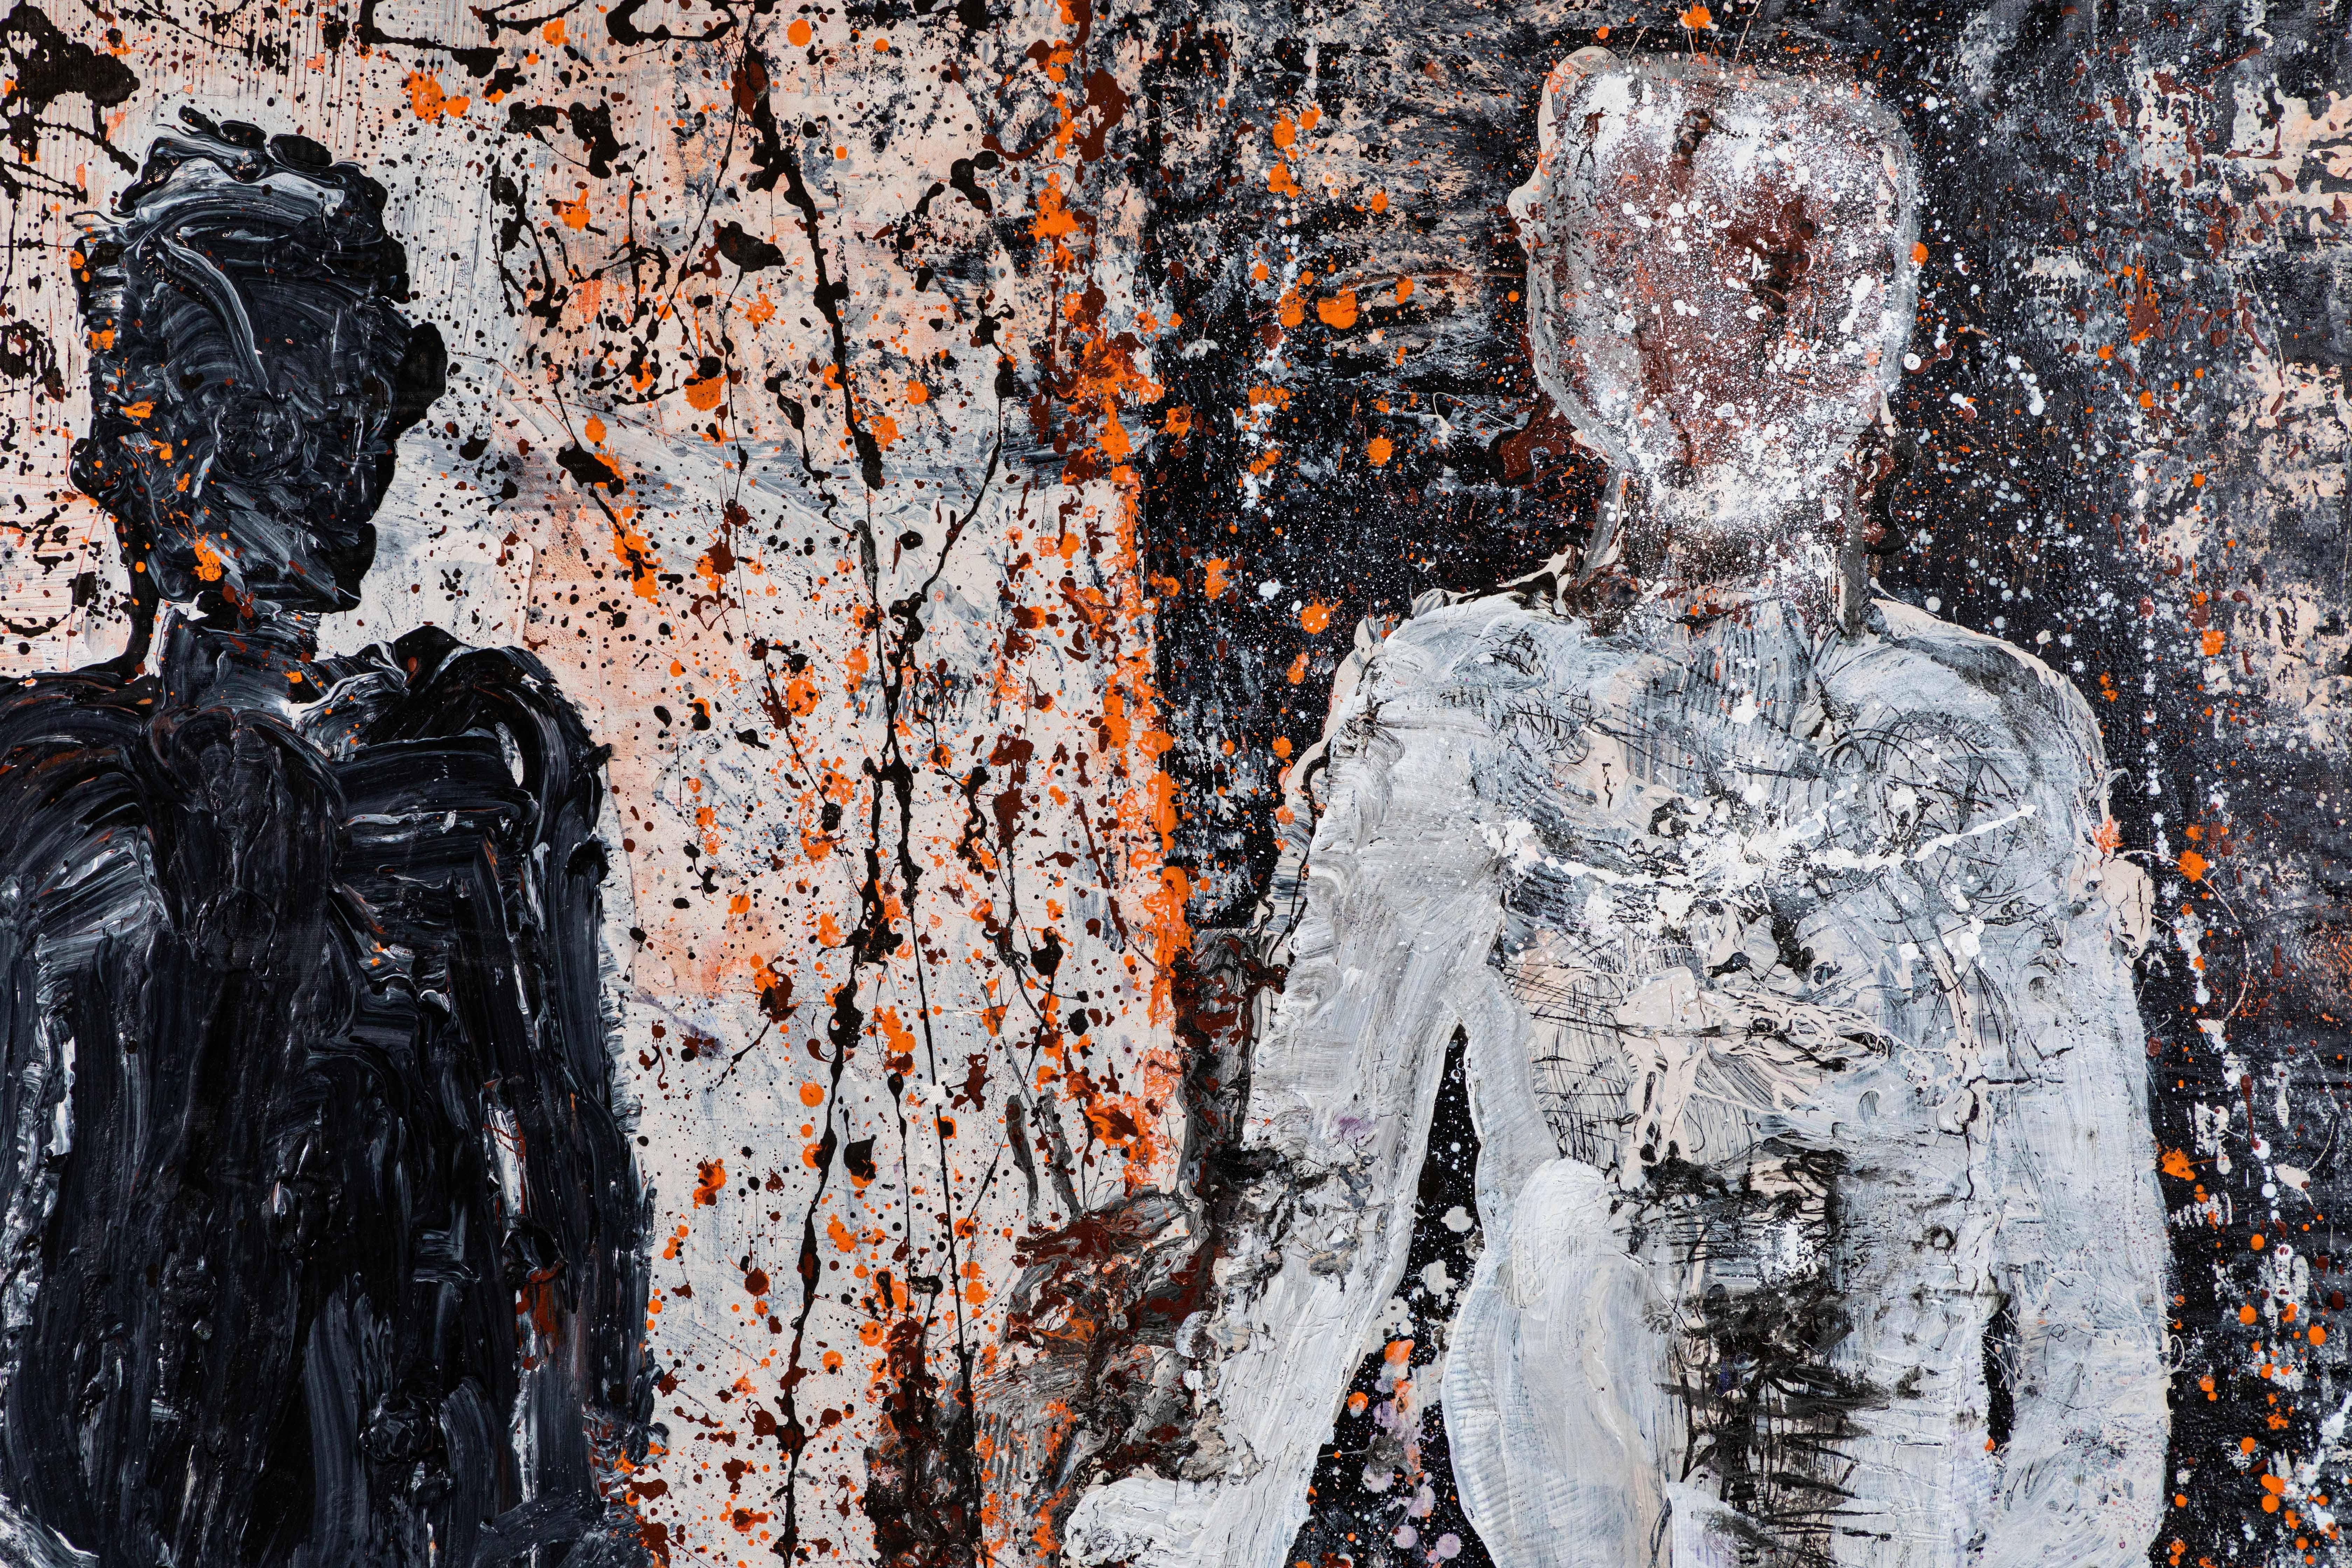 Large abstract acrylic on canvas by well-known Palm Springs base artist, Christopher Shoemaker. Dominated by two large human forms the painting has been done with a spatter painted styled in black, white, orange and oxblood colors.